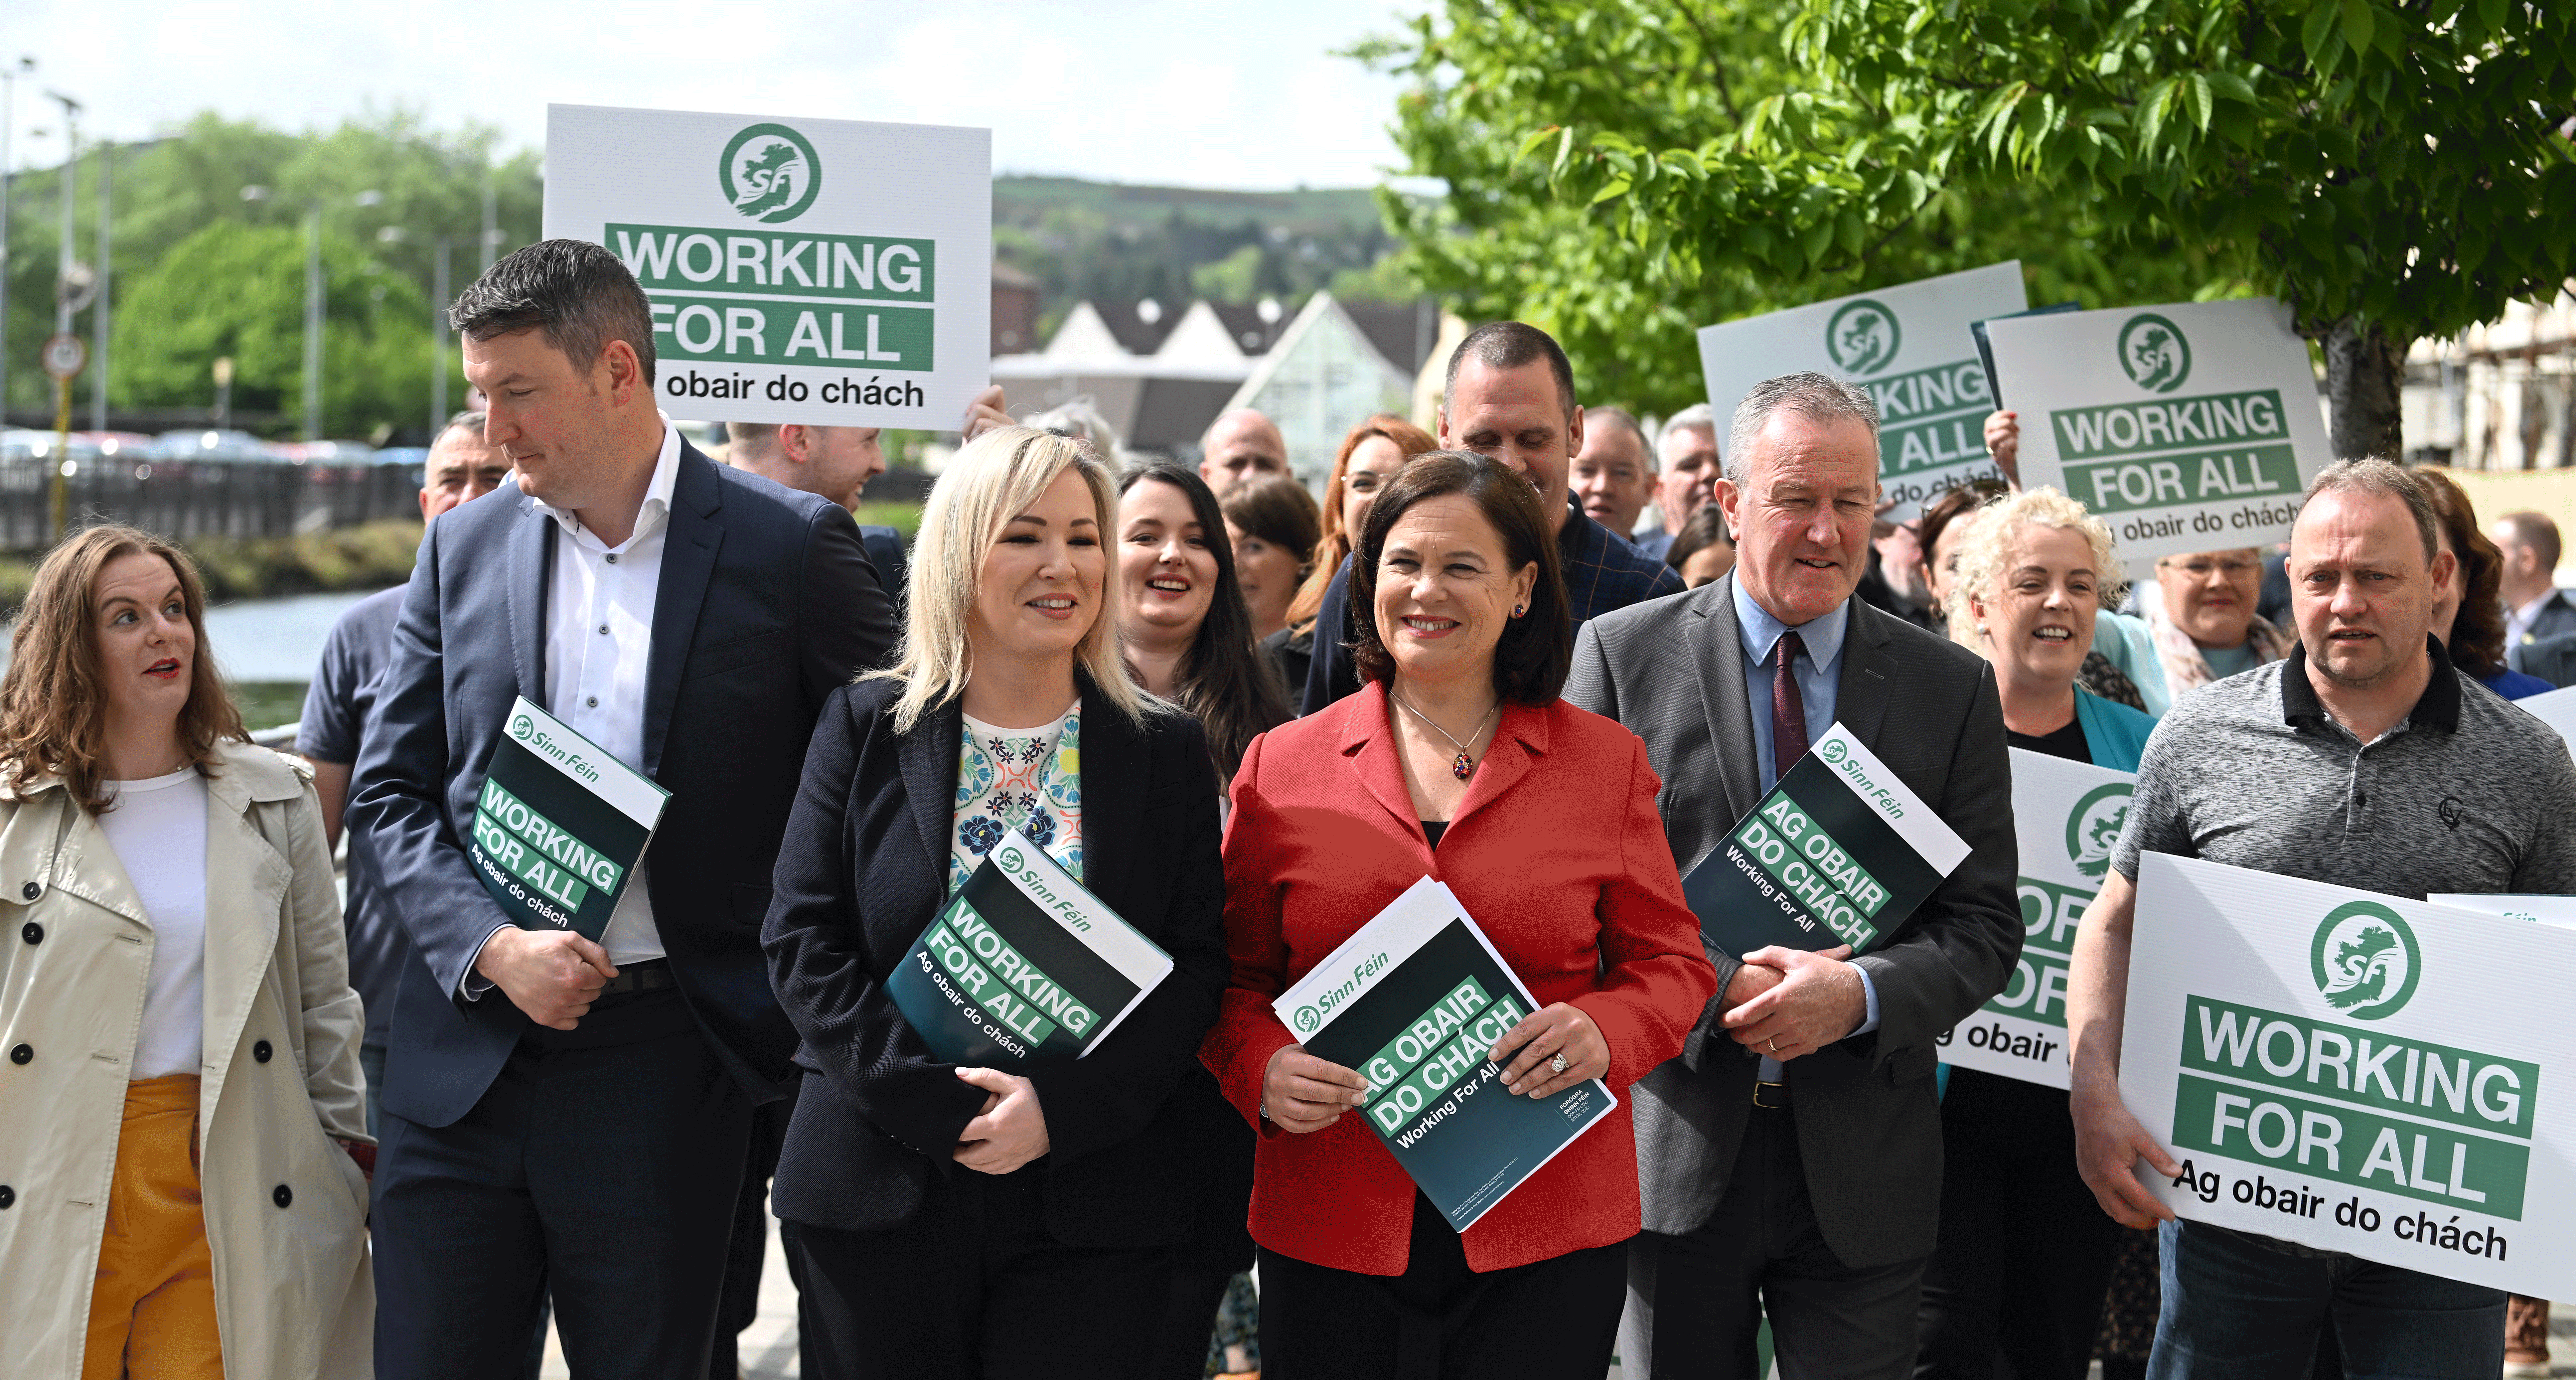 Sinn Fein’s Coronation gesture was nothing but an electoral ploy